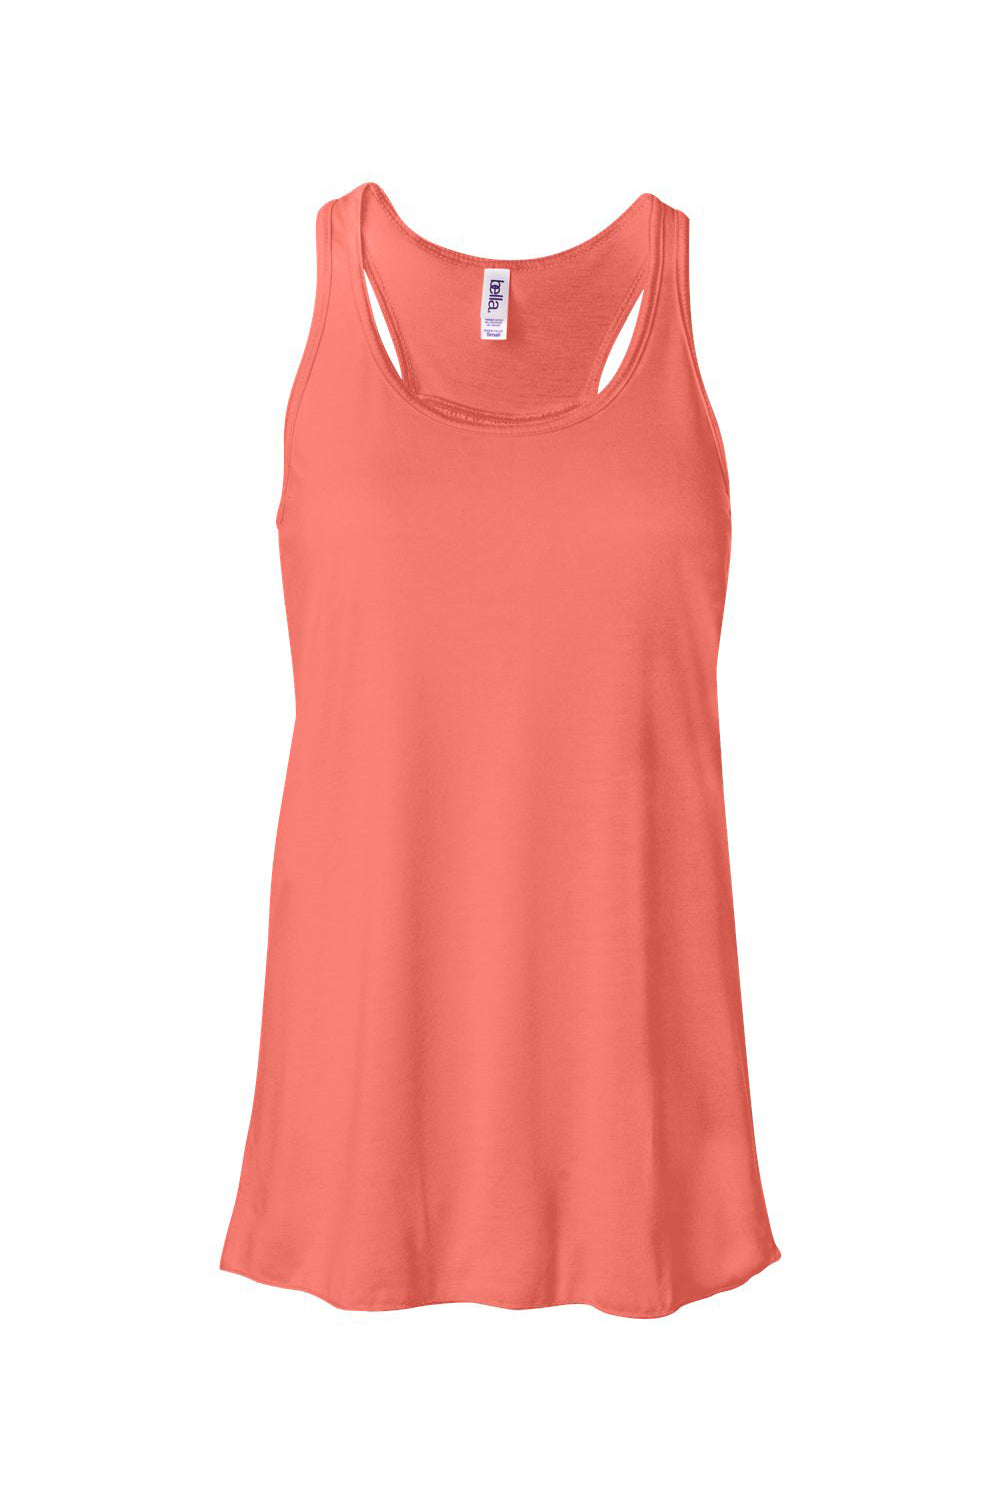 Bella + Canvas BC8800/B8800/8800 Womens Flowy Tank Top Coral Flat Front